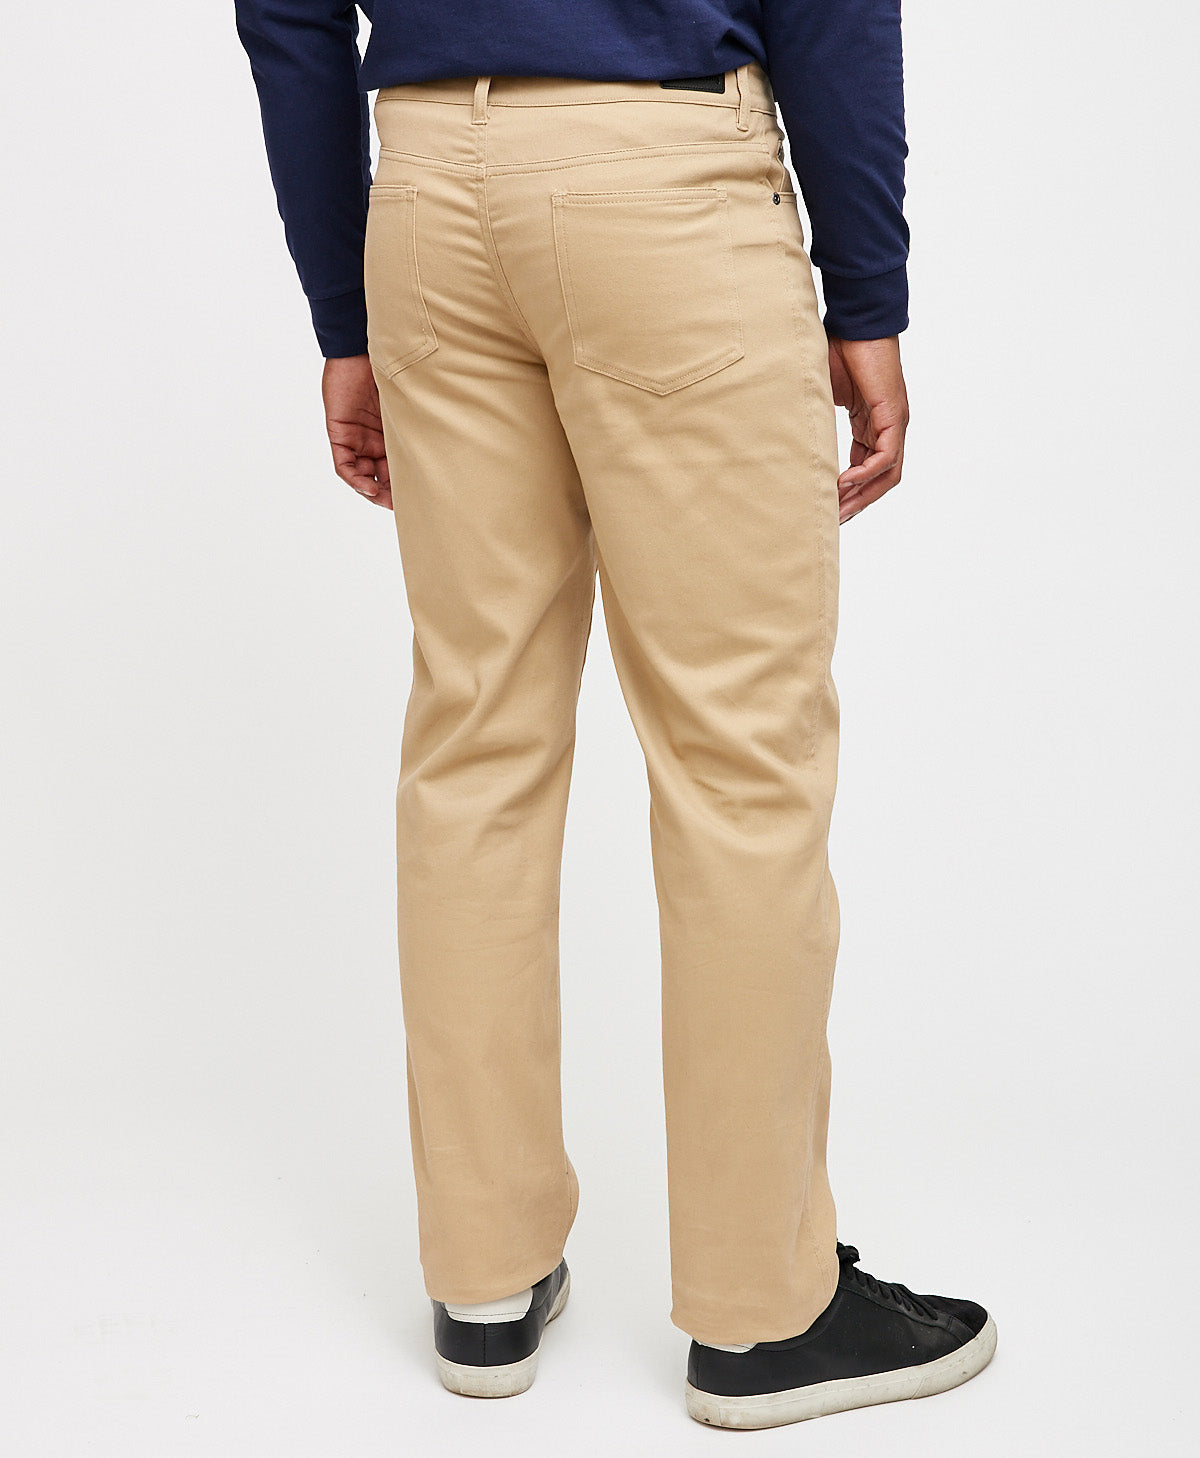 Men's Every Wear Athletic Fit Chino Pants - Goodfellow & Co™ Black 30x30 | Chino  pants men, Chinos pants, Mens chino pants